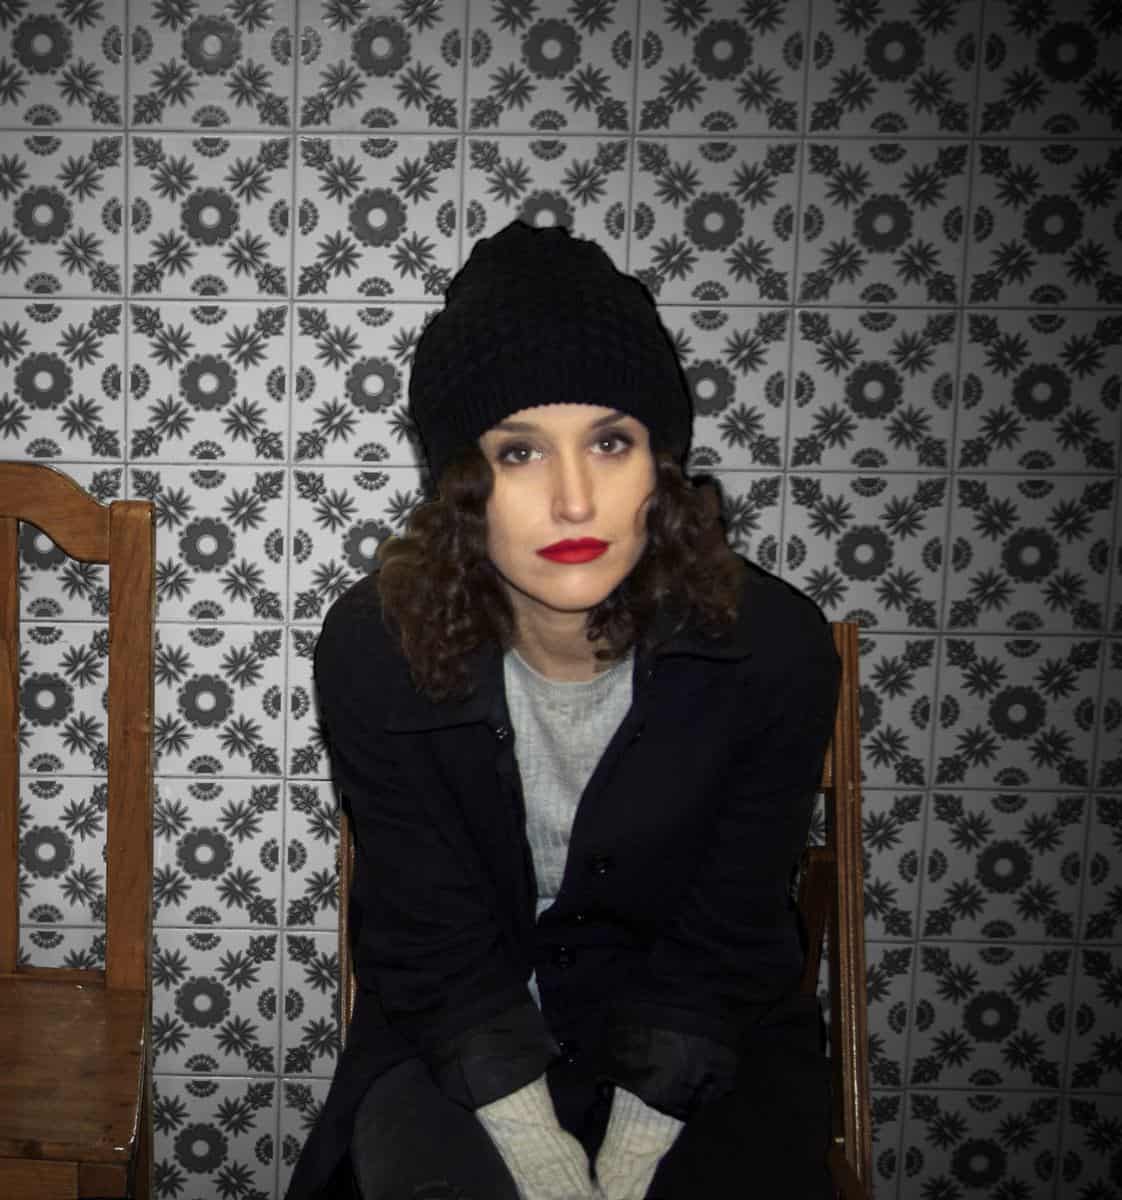 Steph Copeland sits against a wallpapered background